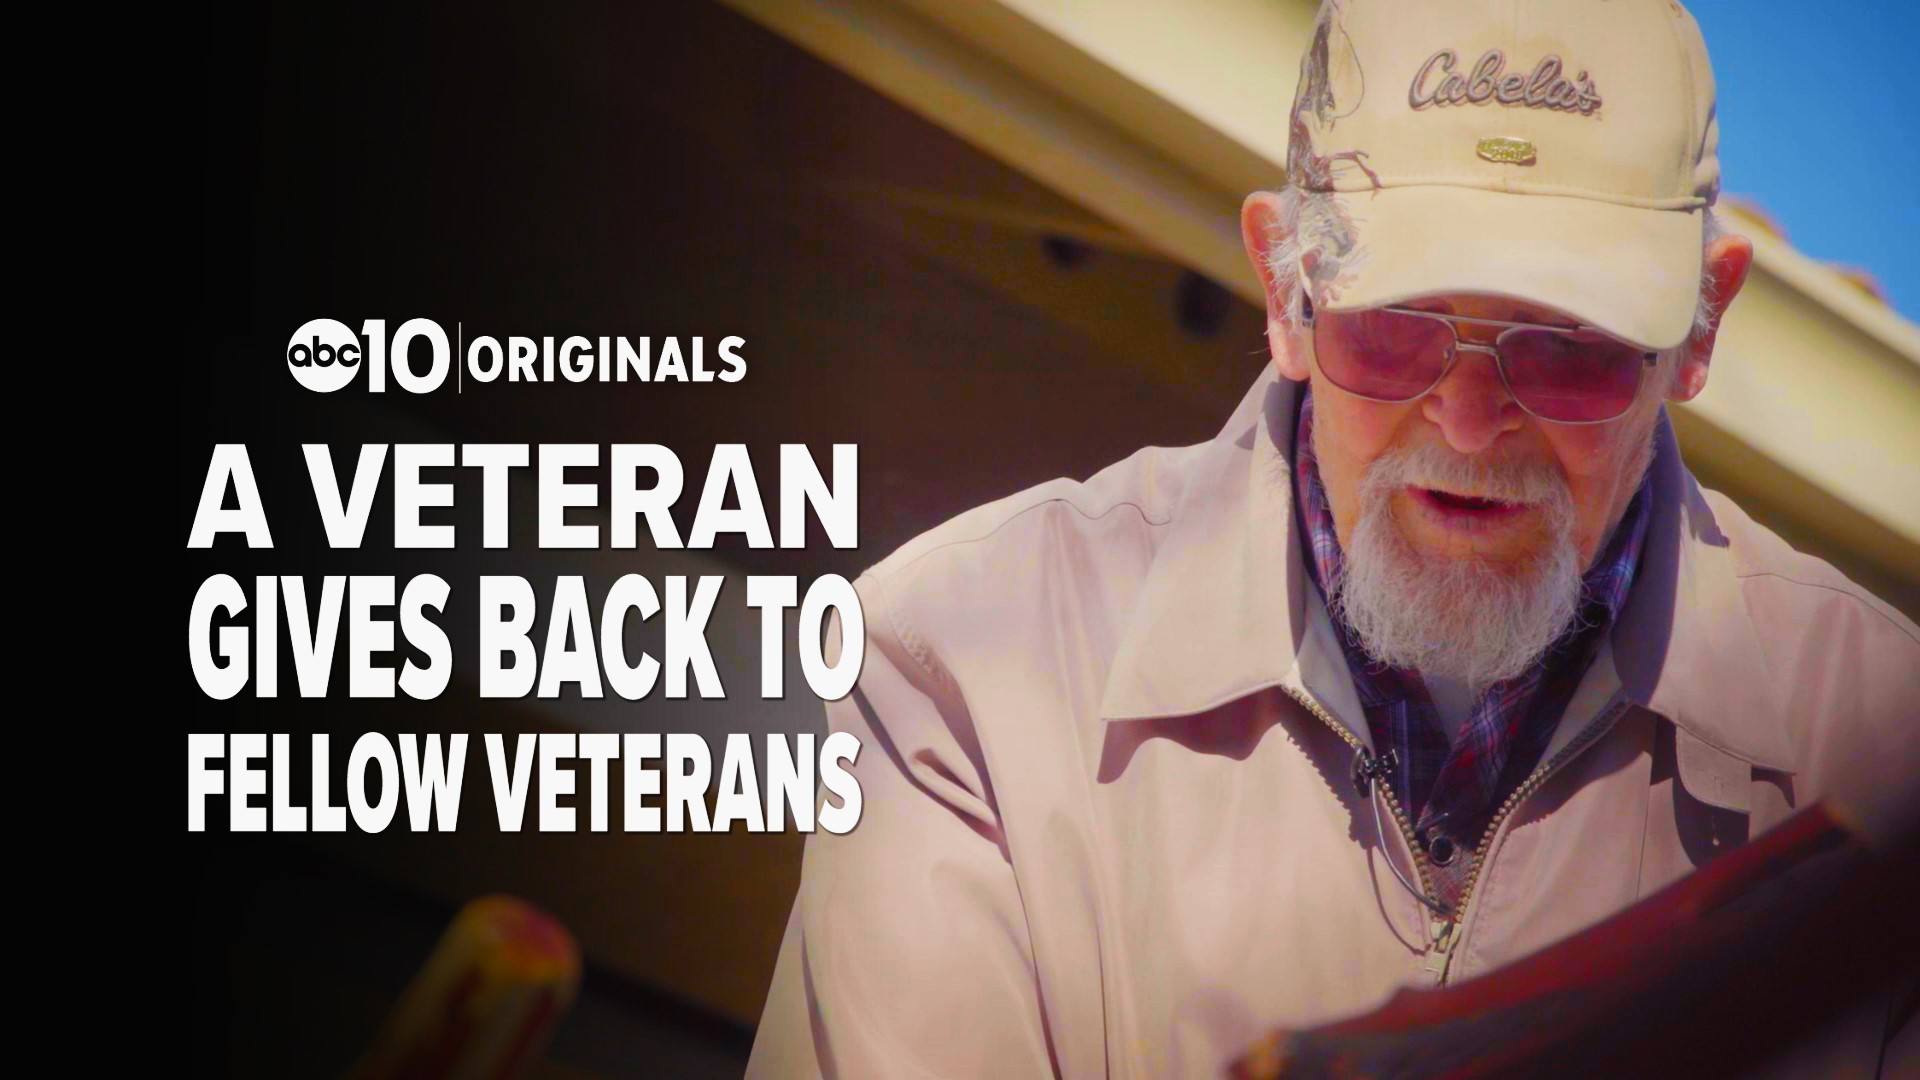 A Cold War veteran battles cancer by helping fellow vets and their loved ones. John Bartell visits an amazing man and the friend who is helping him carry out his act of kindness